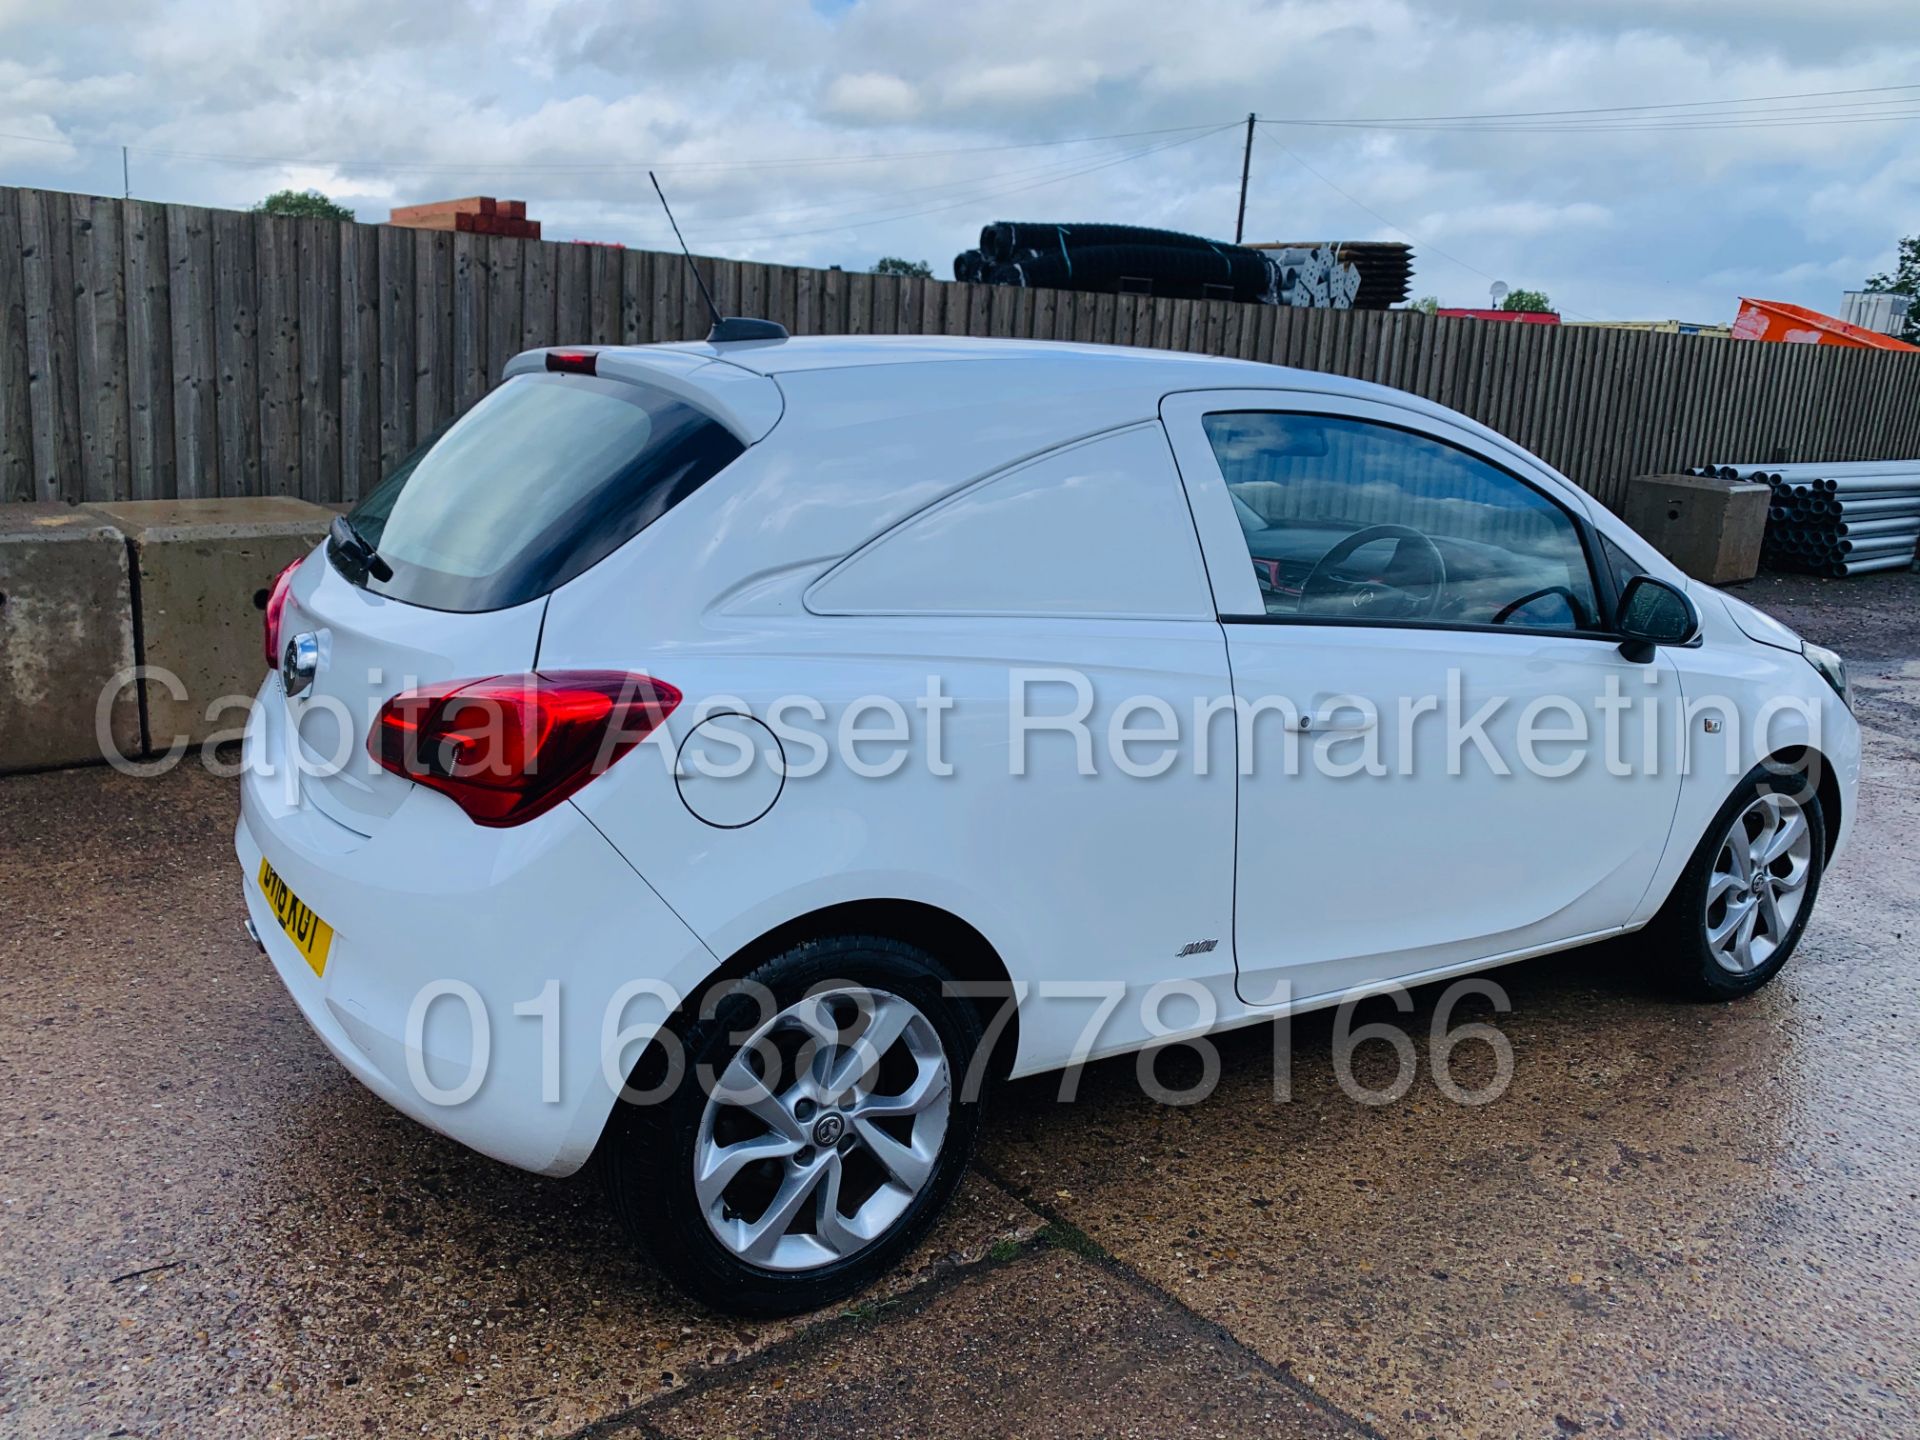 (On Sale) VAUXHALL CORSA *SPORTIVE - VAN* (2016 - NEW MODEL) '95 BHP - 6 SPEED' *A/C* (1 OWNER) - Image 13 of 43